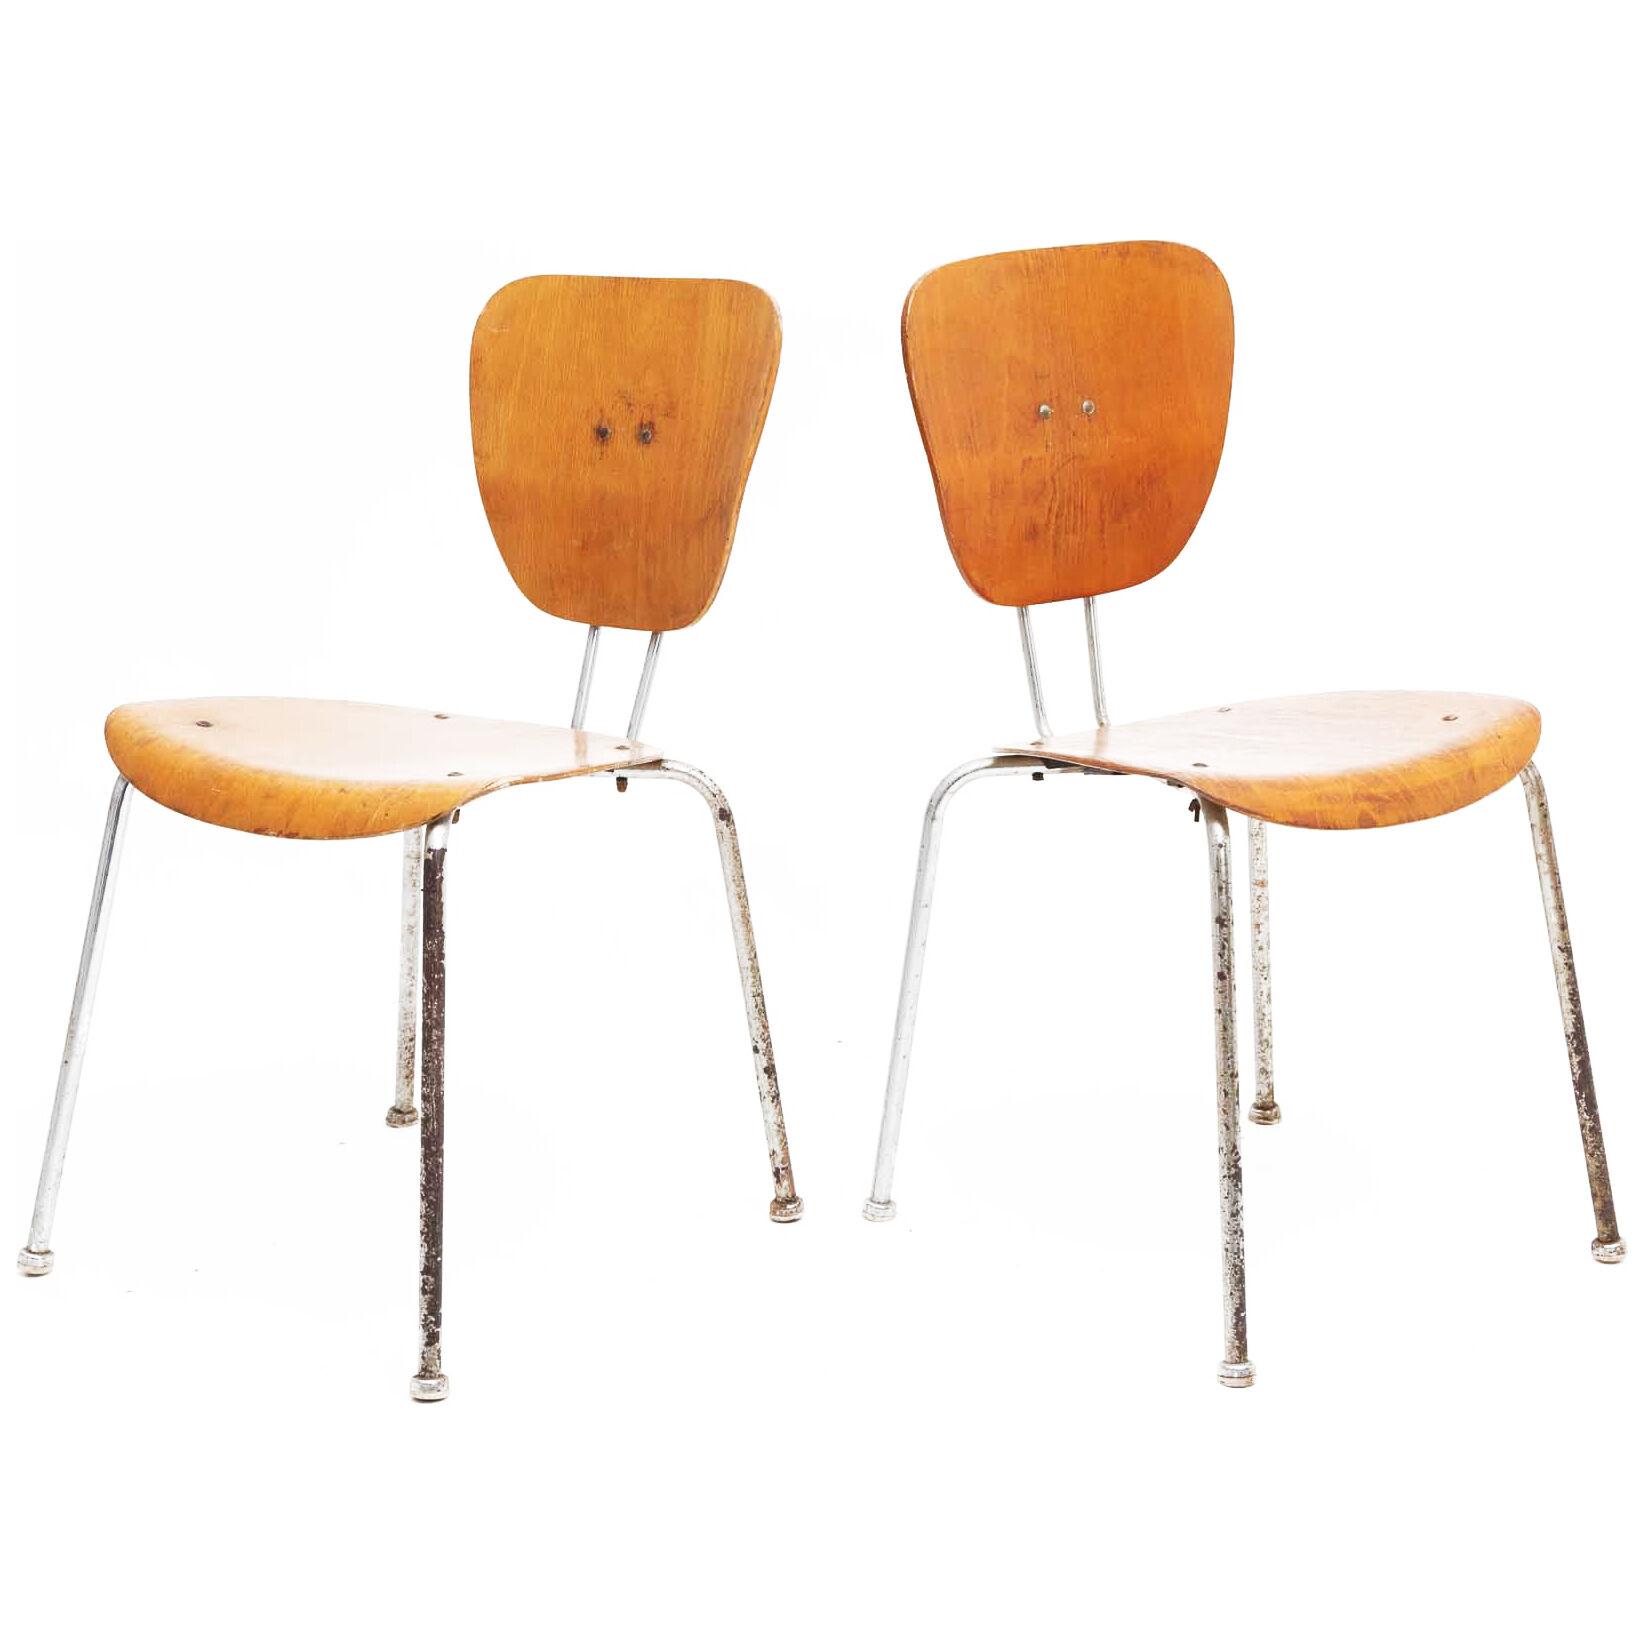 Chairs in the Style of Egon Eiermann, probably Mid-20th Century